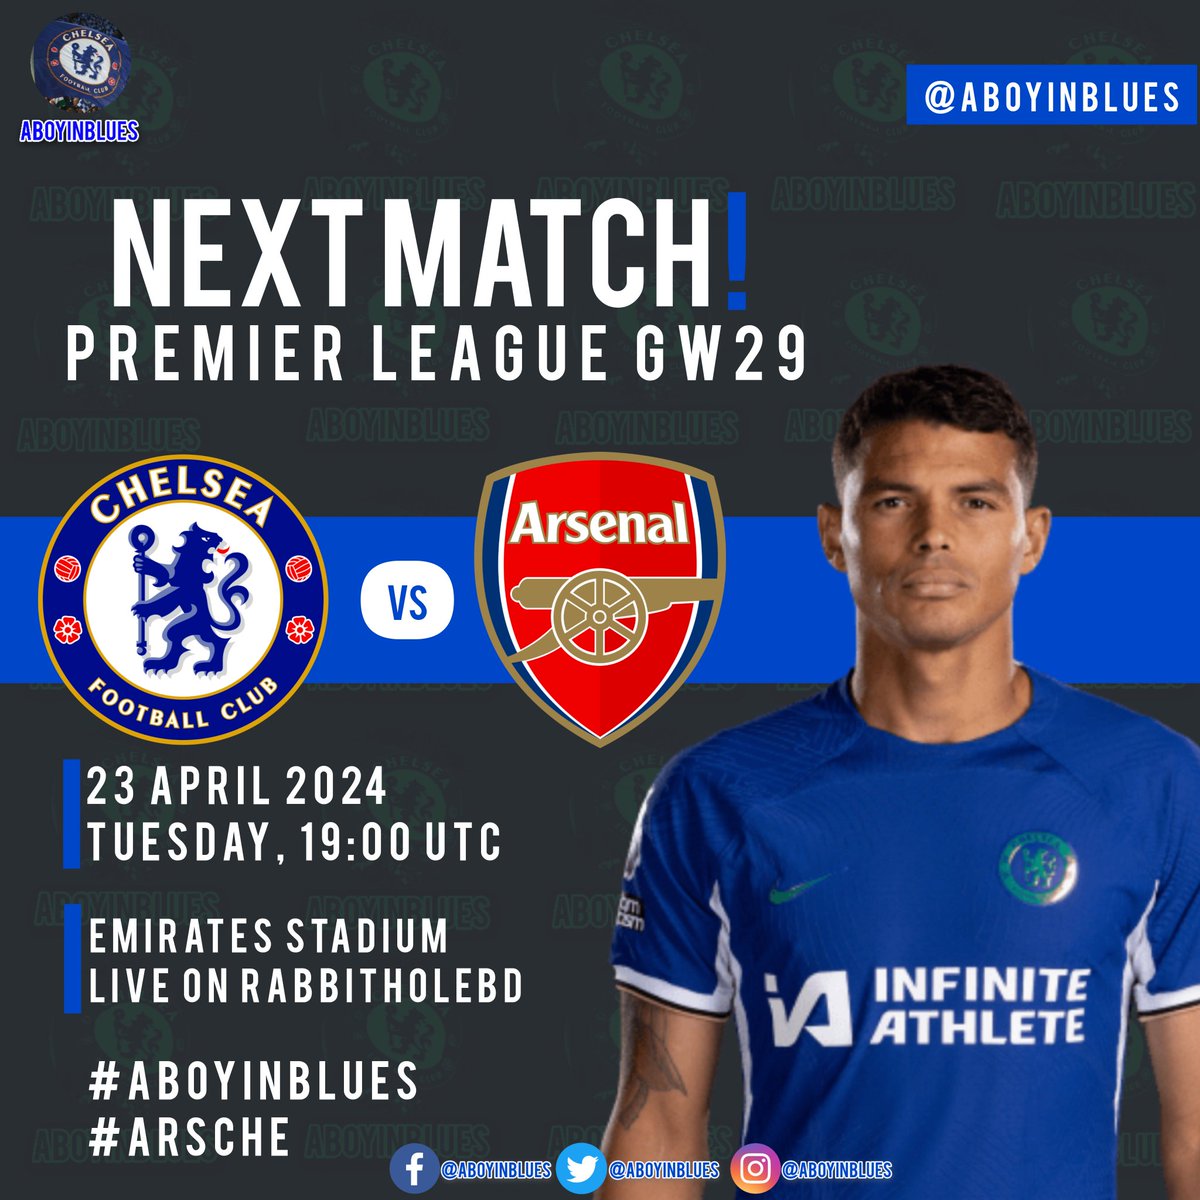 Next Match, Chelsea FC 🆚 Arsenal FC.

Chelsea's next match will be against Arsenal FC at Emirates Stadium.
COME ON CHELSEA ! 

#CFC #chelsea #chelseafc #cfc #cfcfamily #cfcindo #chelseafans #londonisblue #chelseafootballclub #arsche #chears